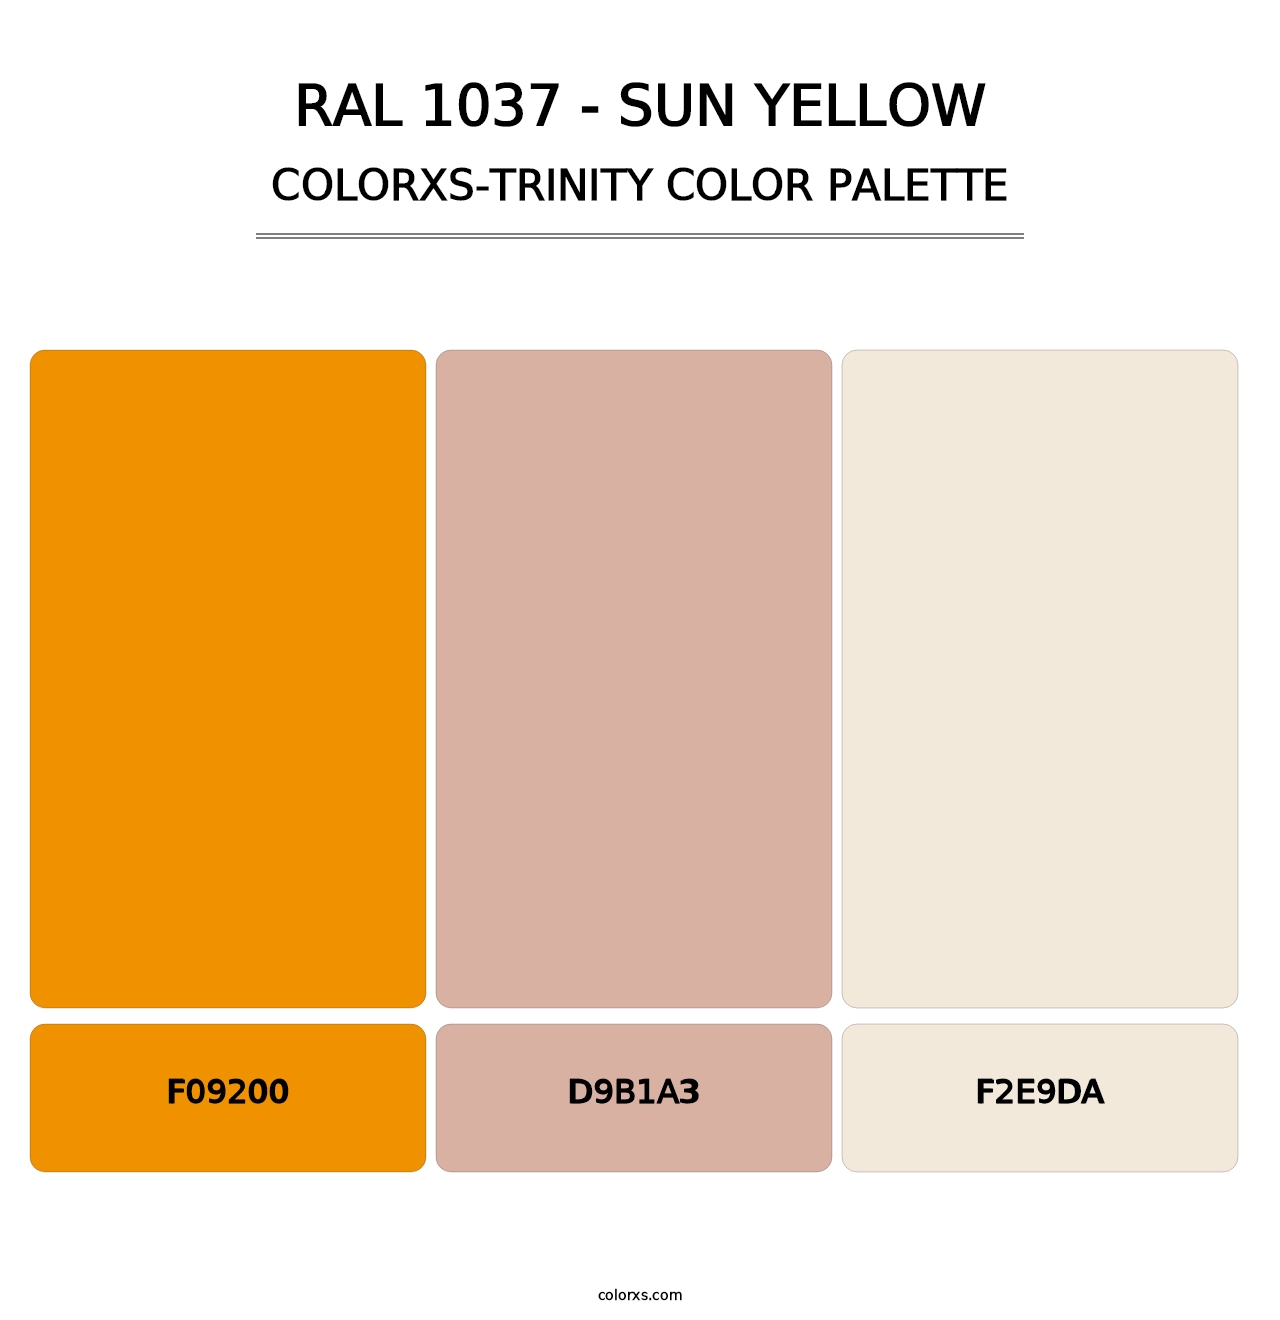 RAL 1037 - Sun Yellow - Colorxs Trinity Palette